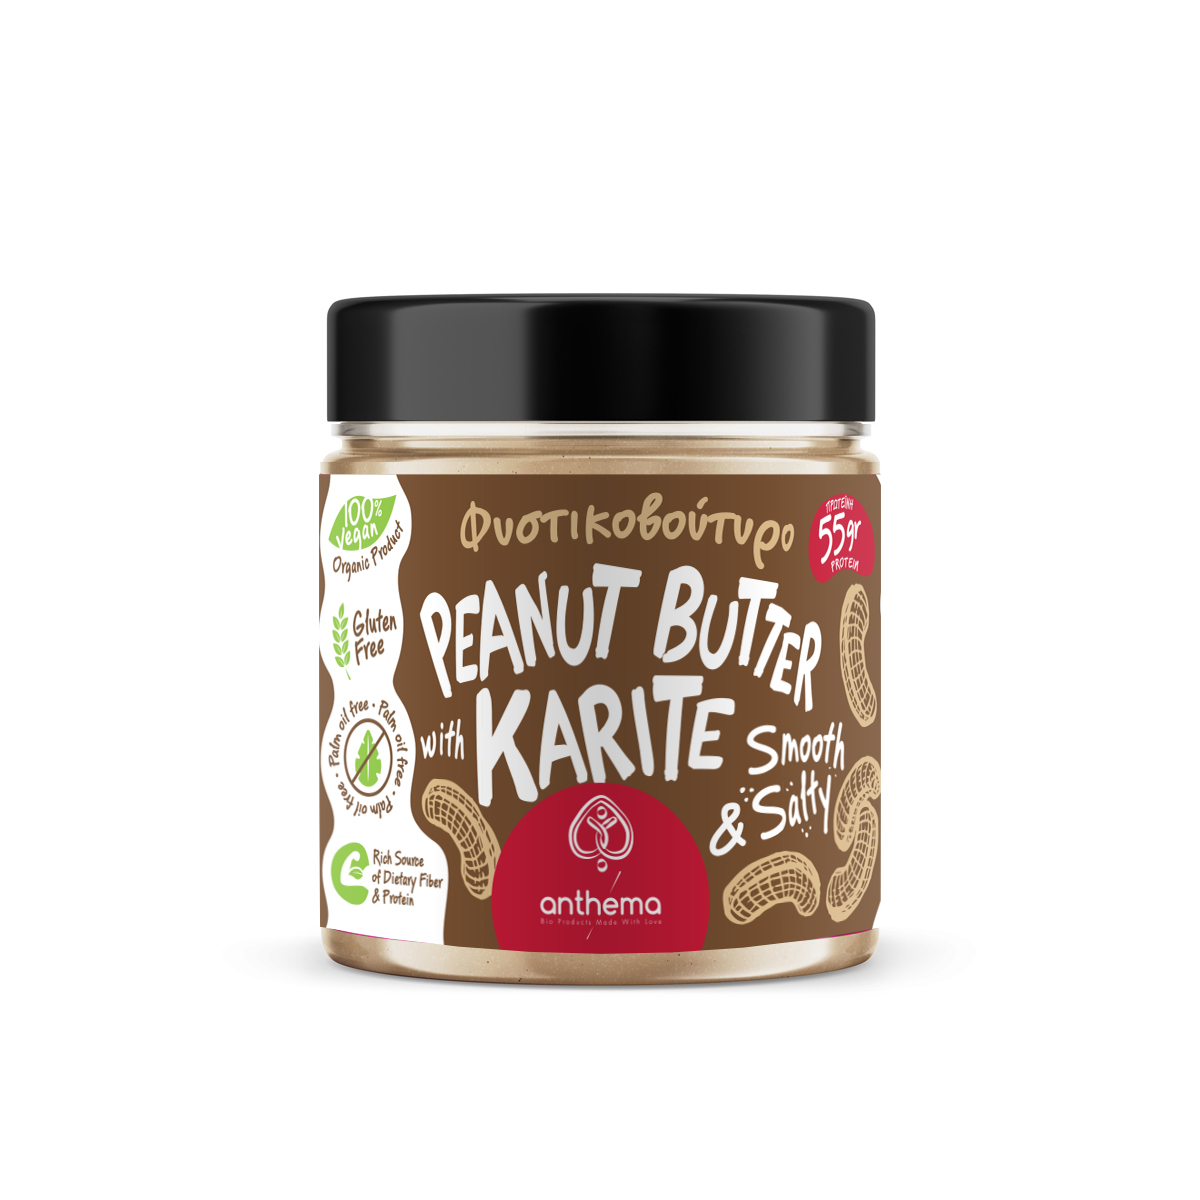 Peanut Butter Smooth & Salty 210gr